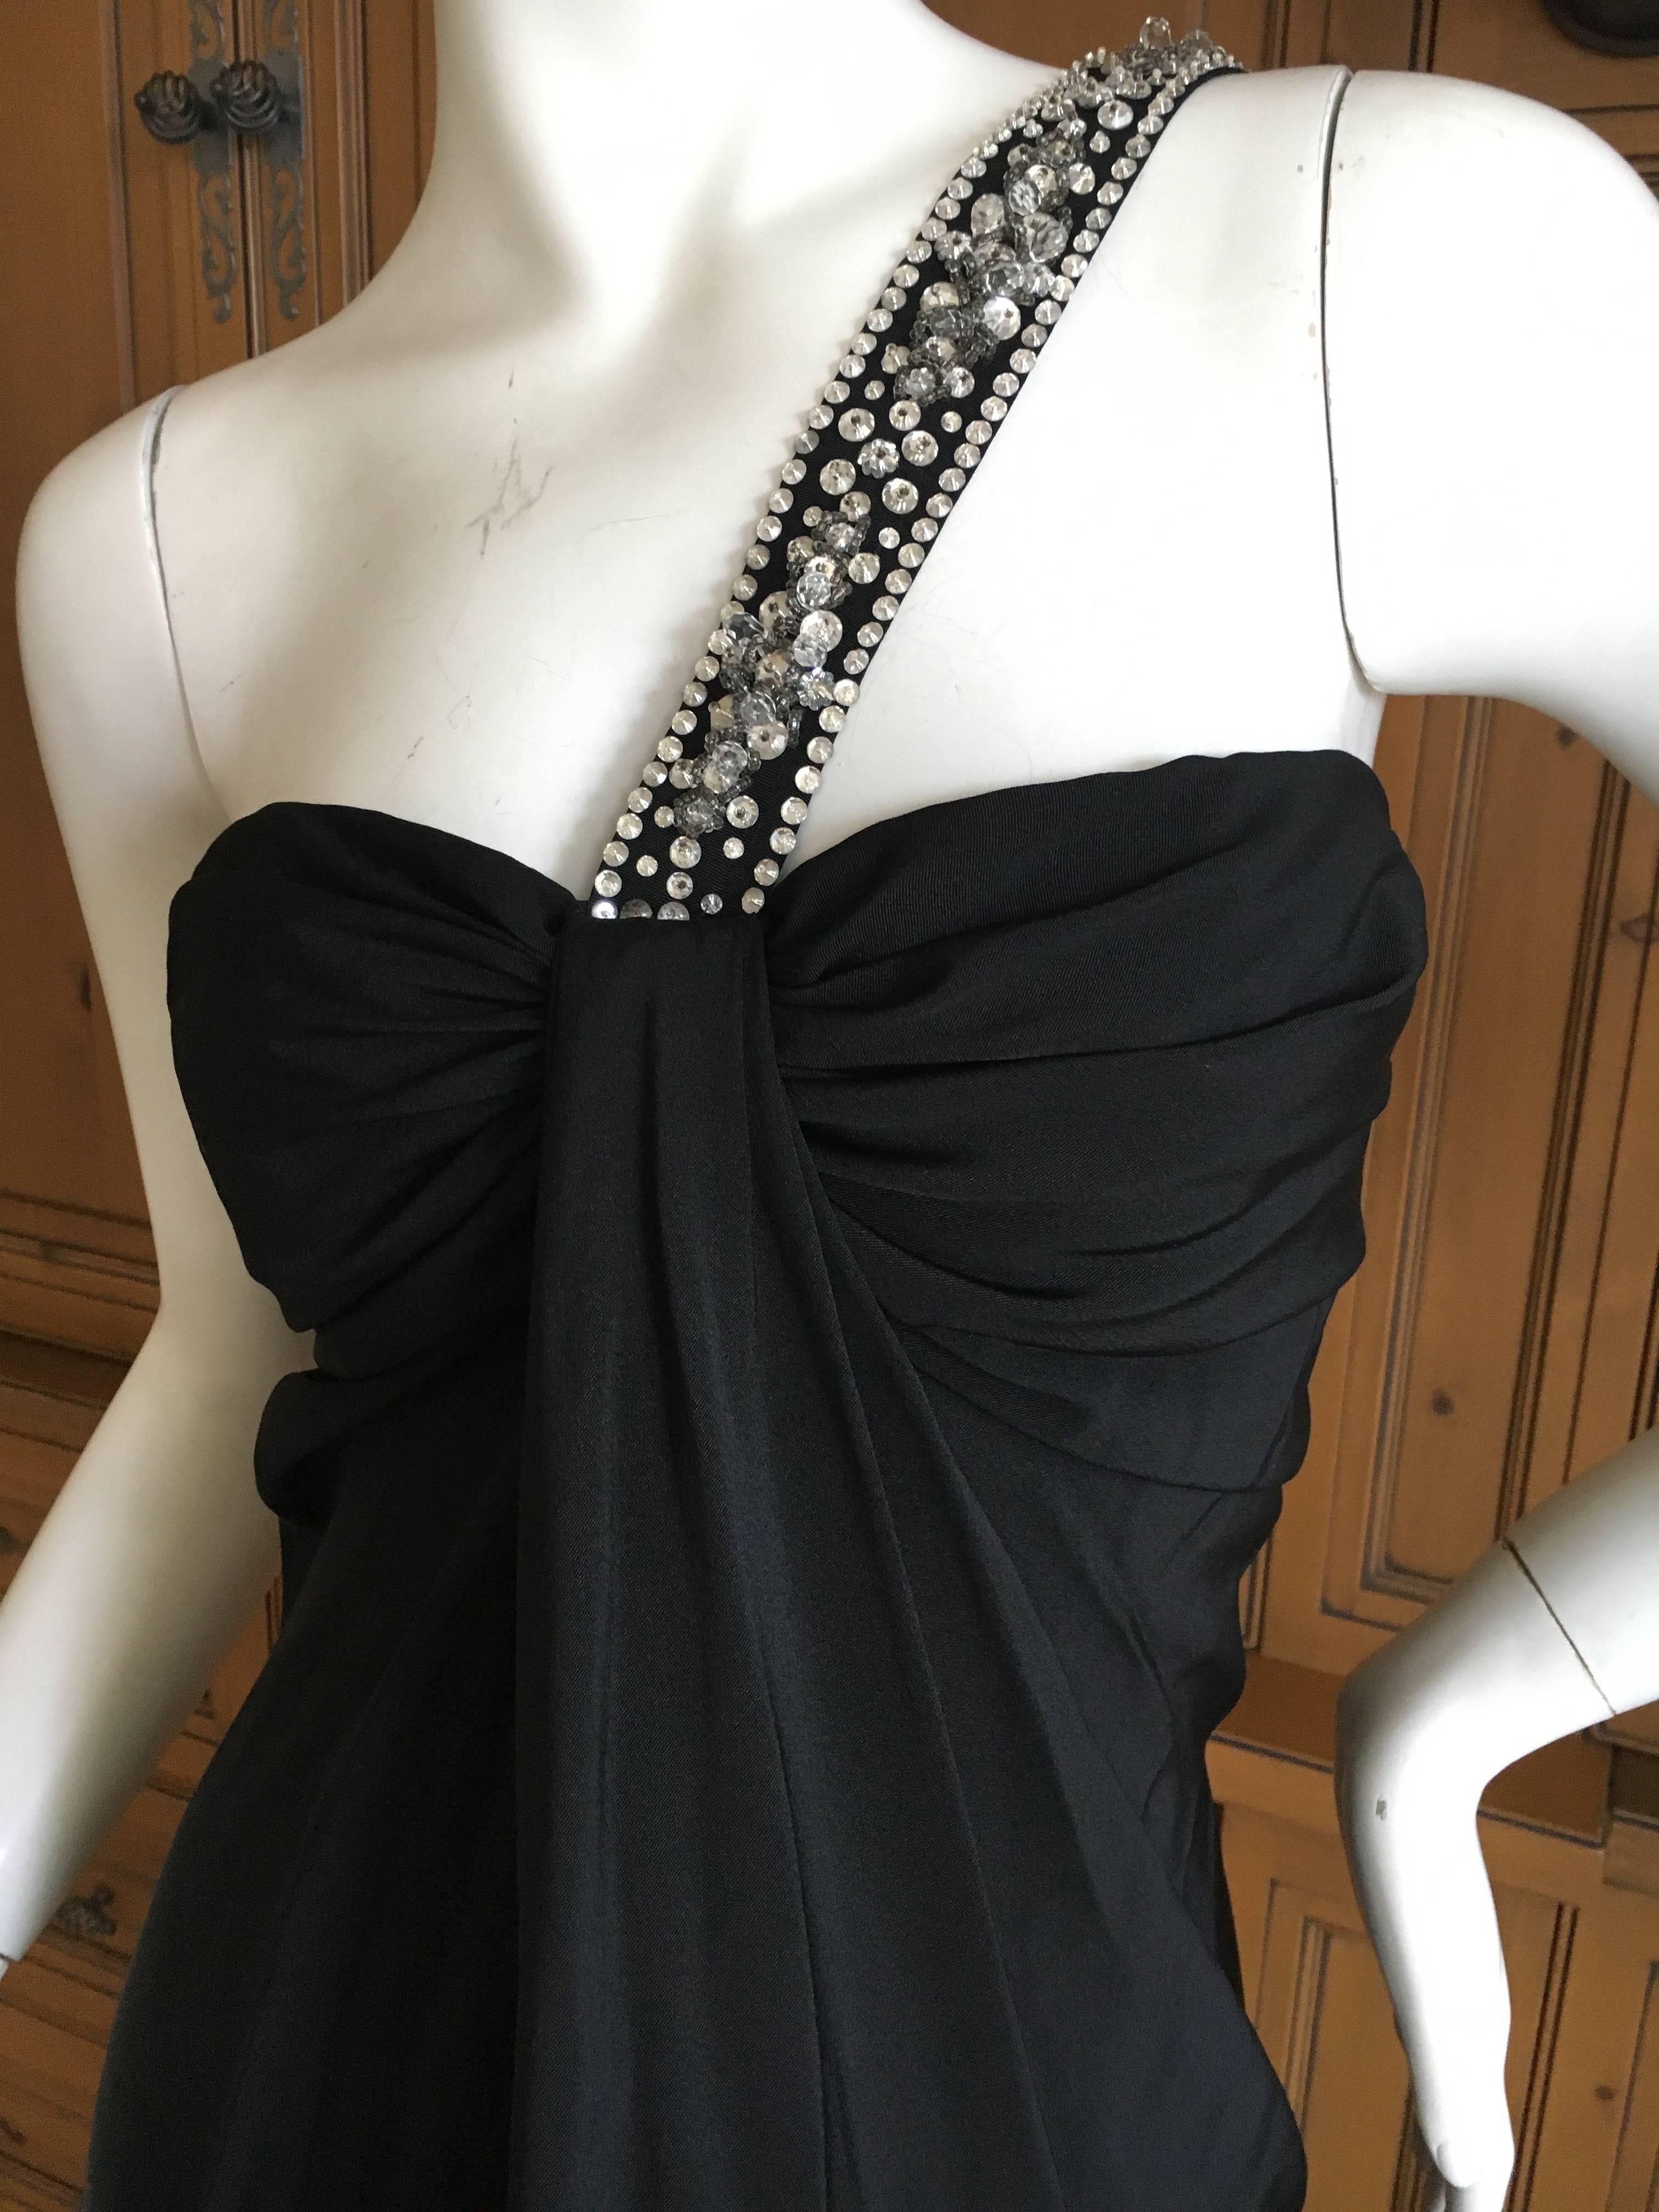  Galanos for Martha Park Avenue Black Silk Crepe Dress with Jeweled Strap In Excellent Condition For Sale In Cloverdale, CA